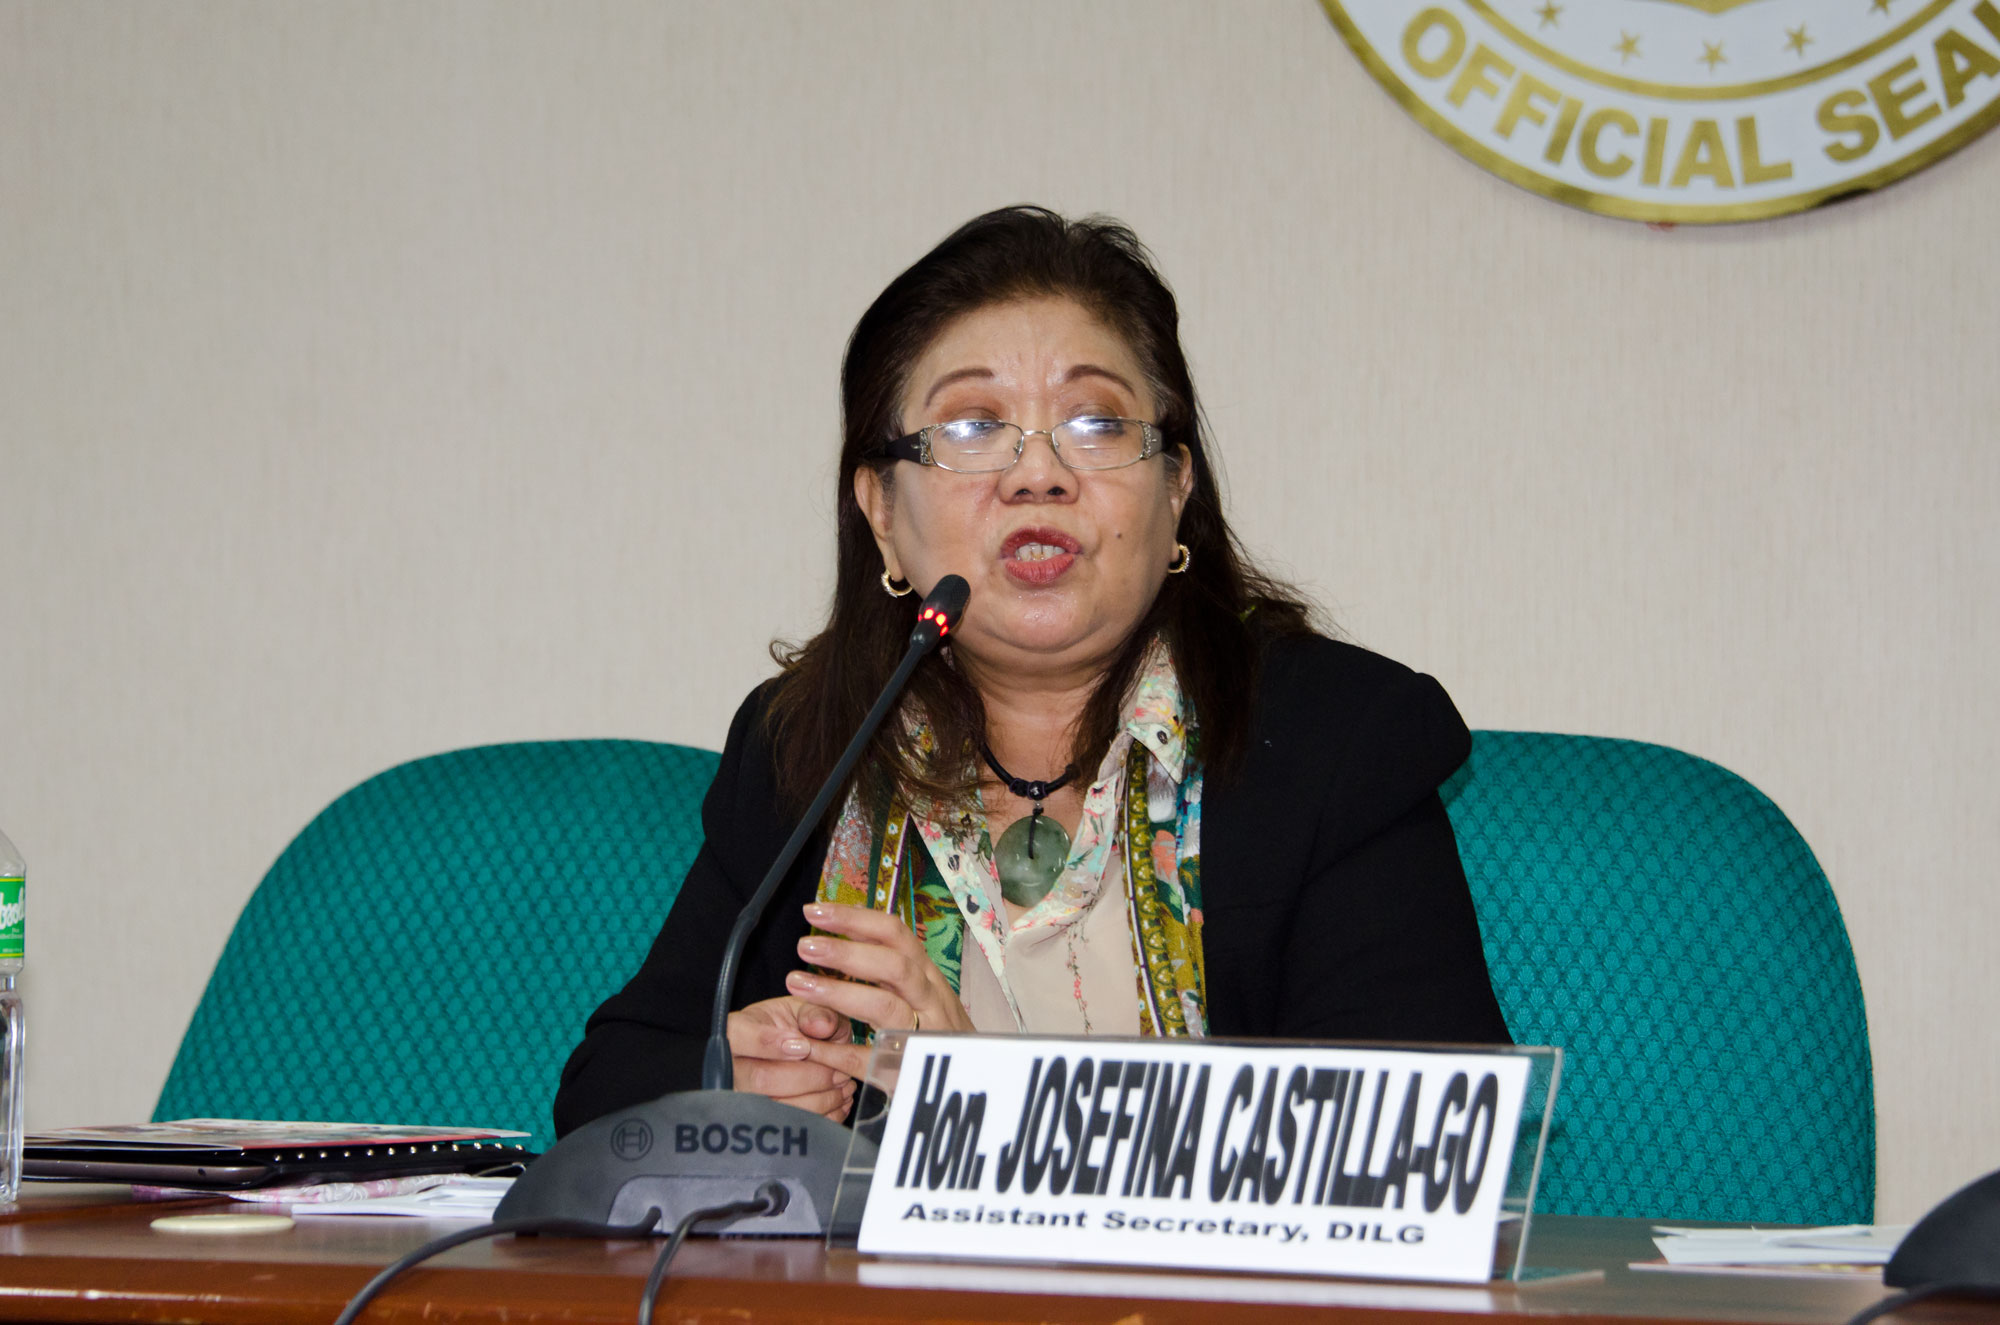 Senate Centennial Lecture Series Assessment Of The Bottom-Up Budgeting Process For FY 2015-GGM_8039.jpg